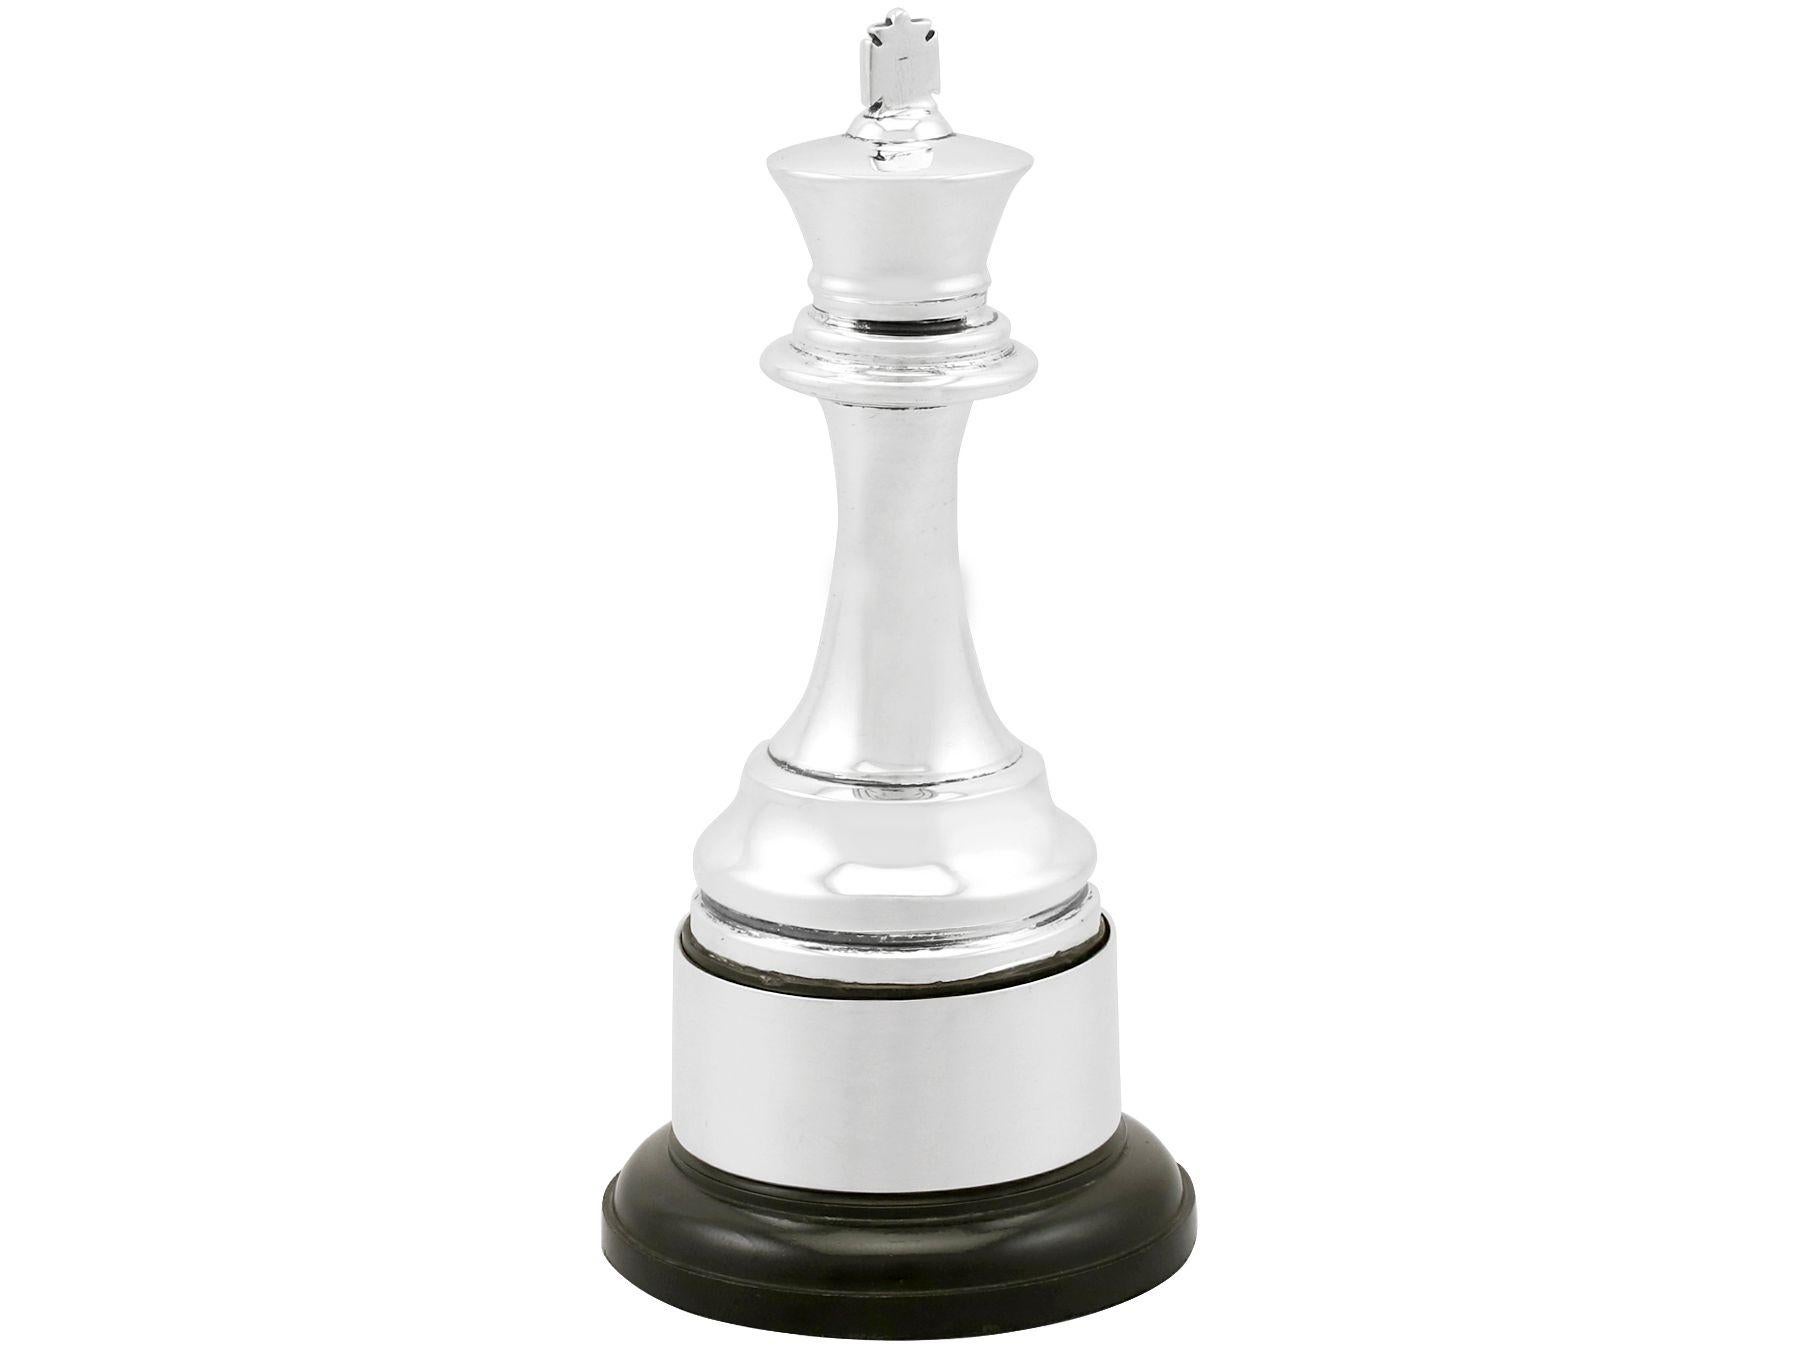 An exceptional, fine and impressive antique George V English sterling silver presentation trophy in the form of a king chess piece; an addition to our ornamental office silverware collection.

This exceptional antique George V sterling silver